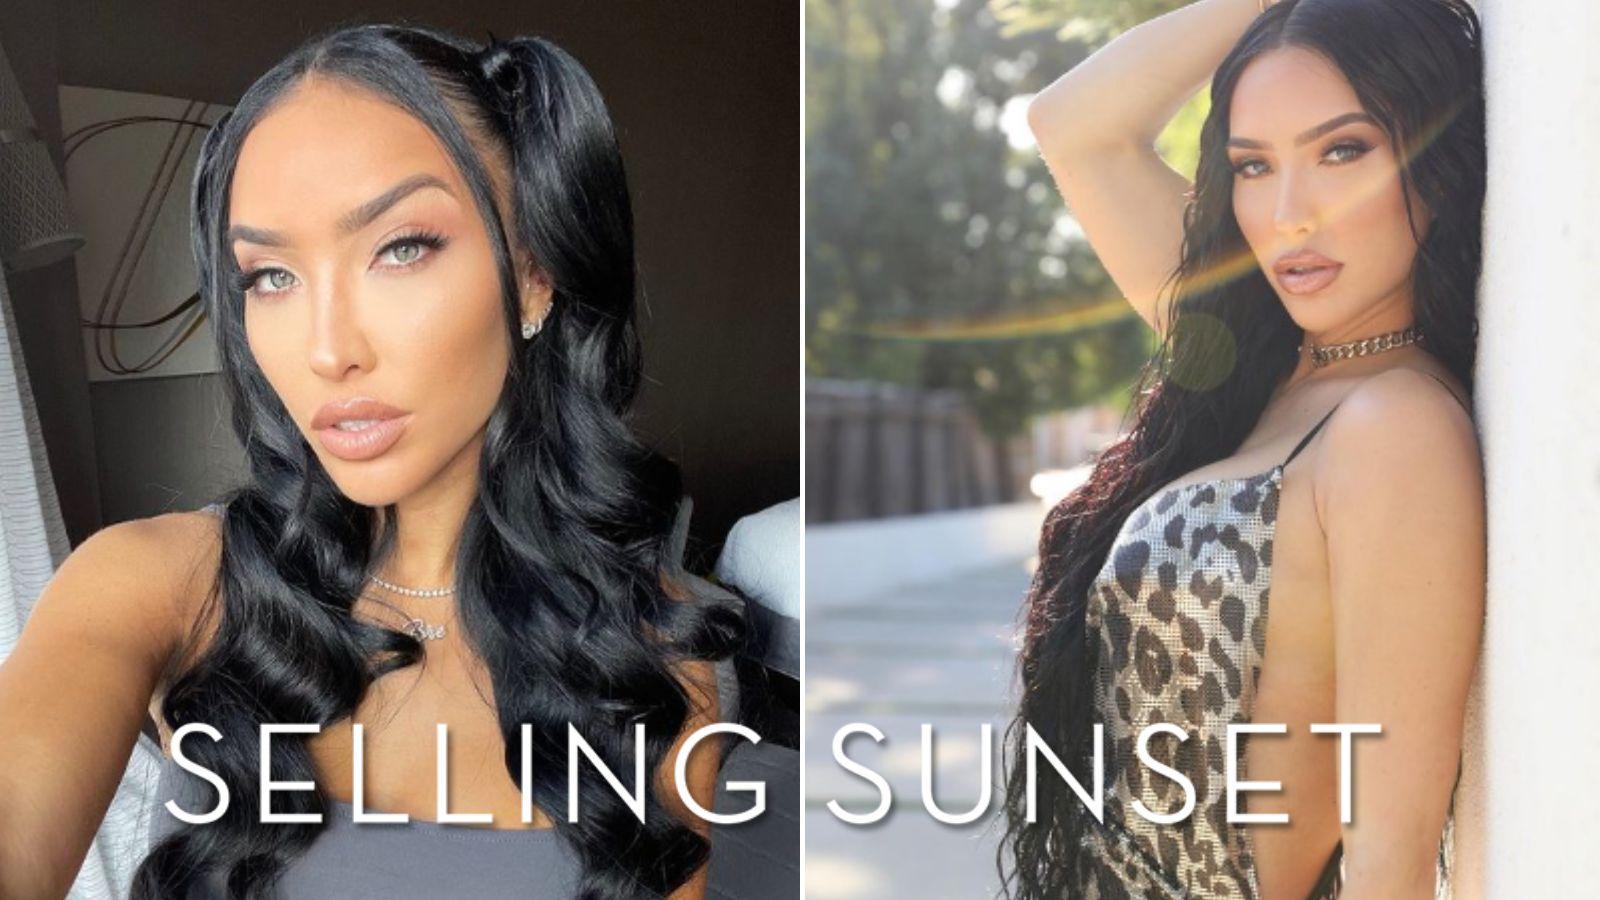 Bre Tiesi from Selling Sunset